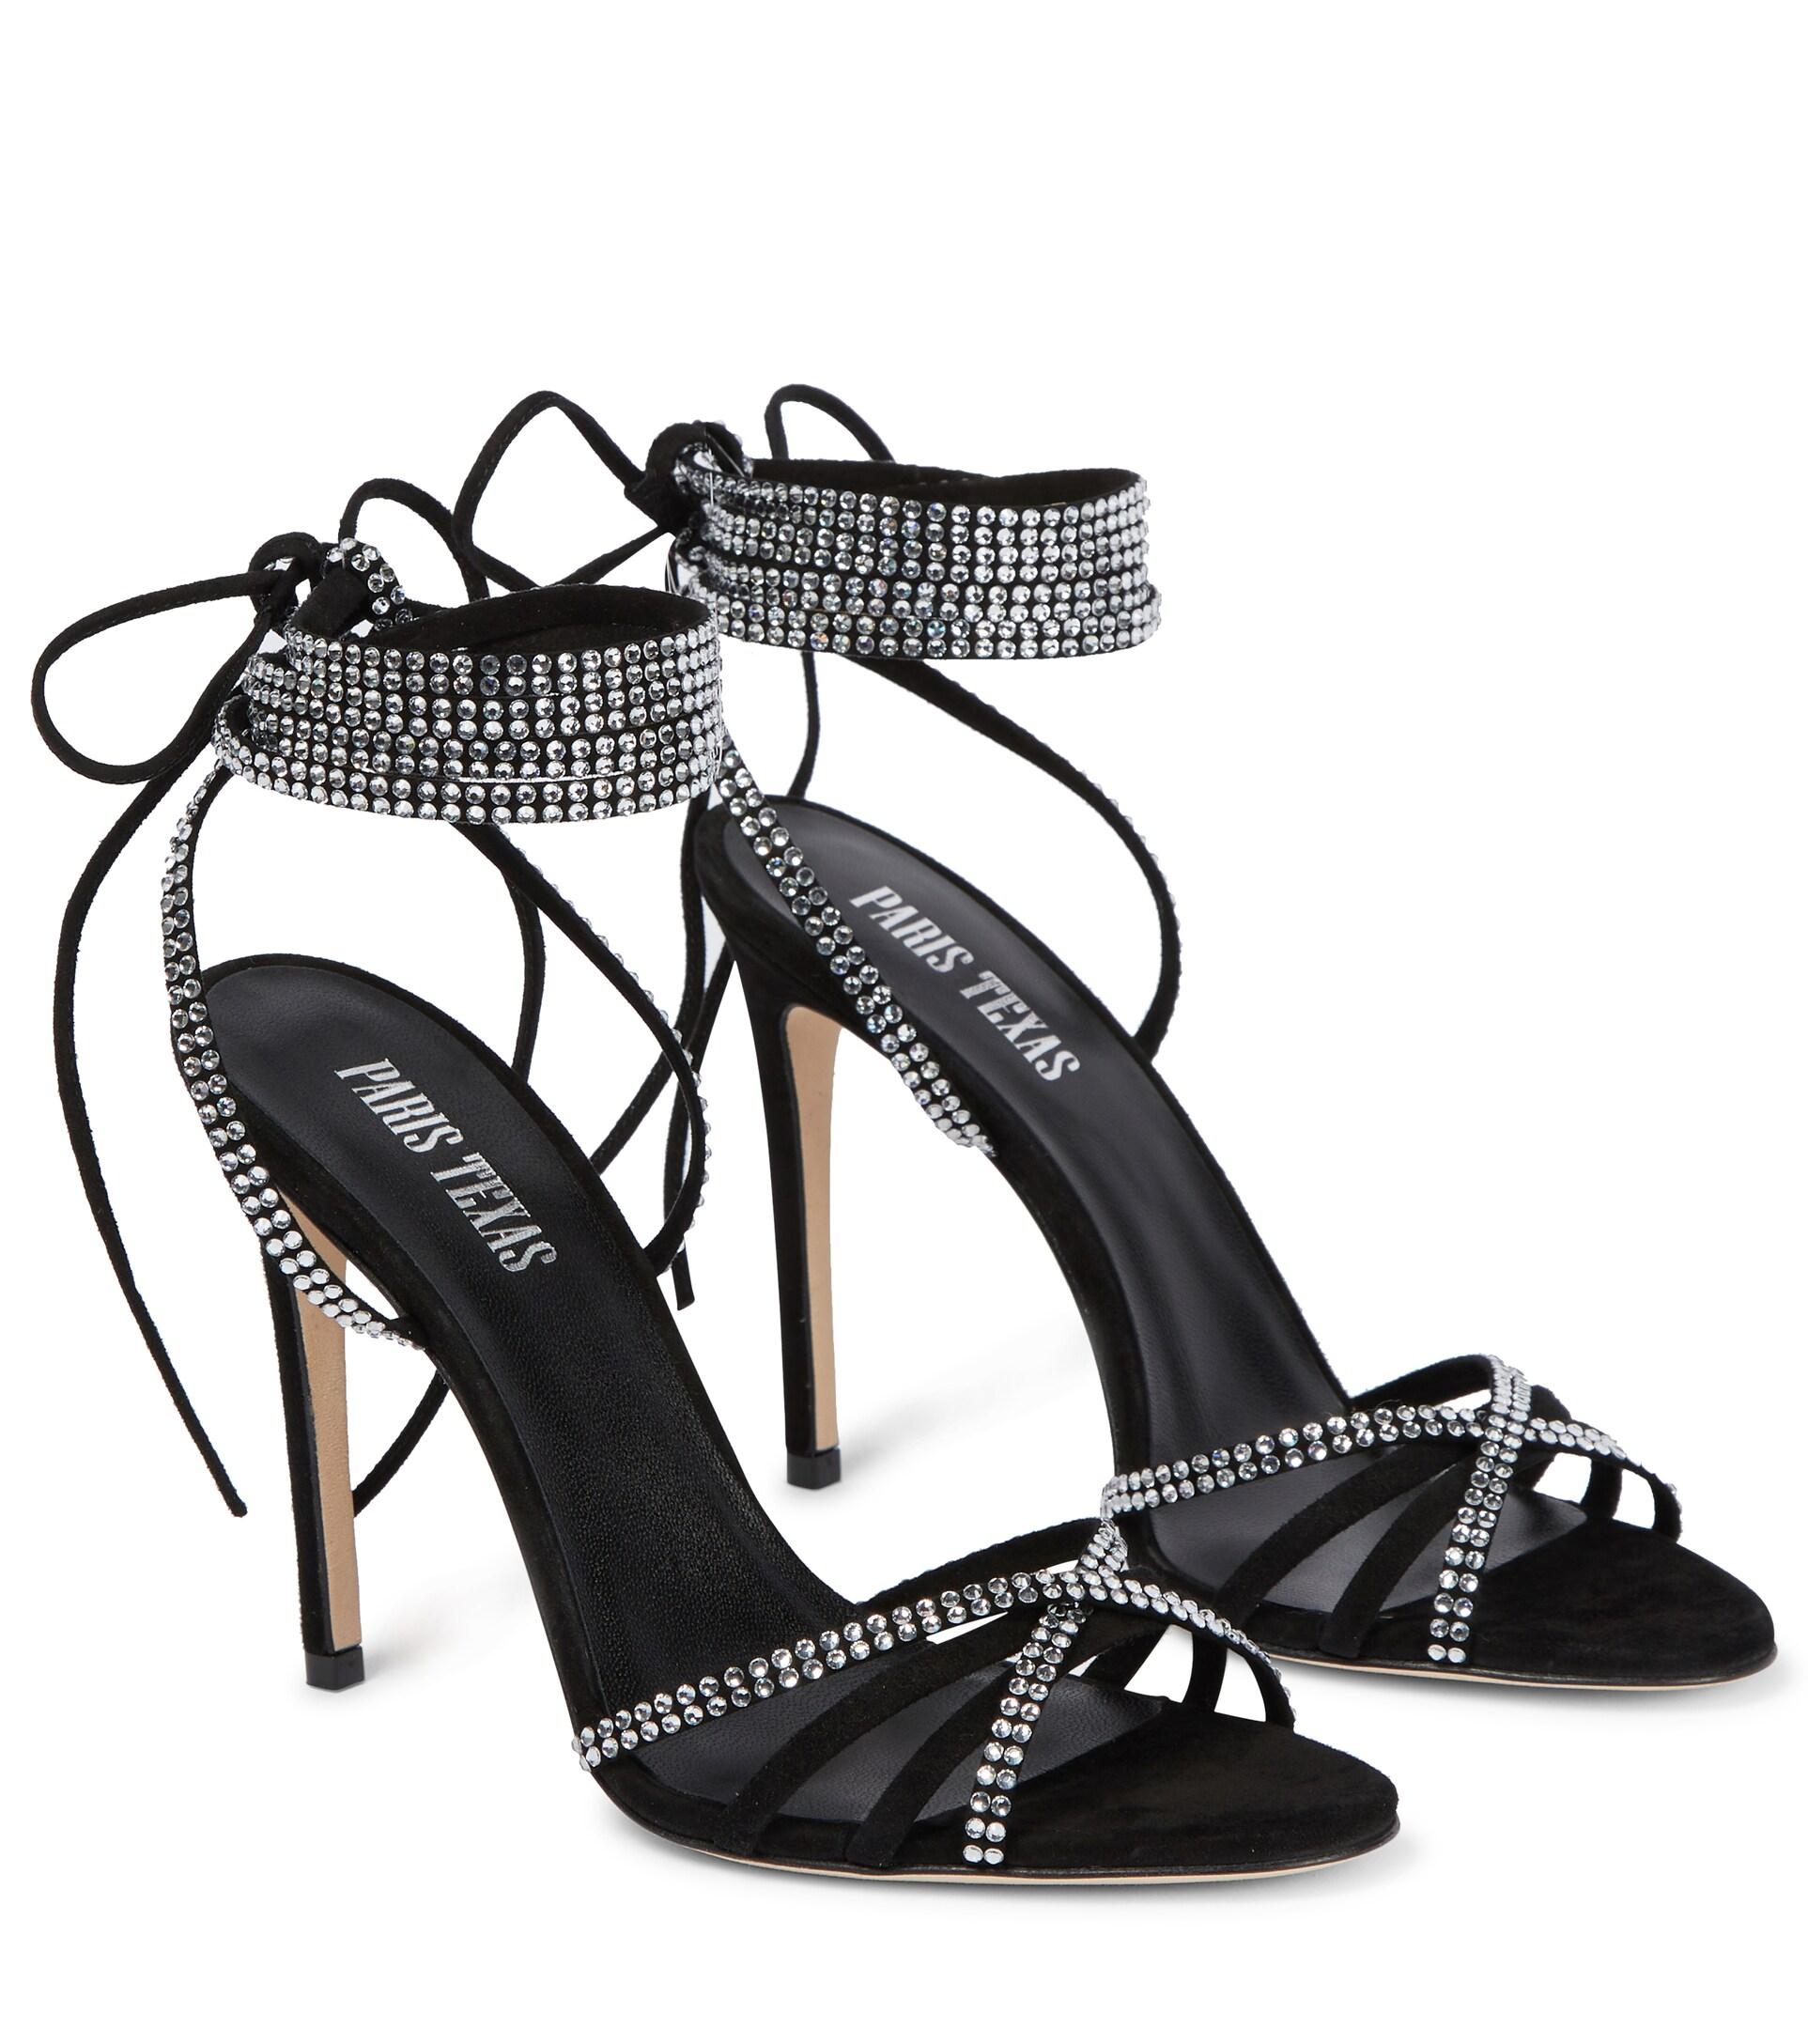 Paris Texas Holly Nicole Leather Sandals in Black | Lyst